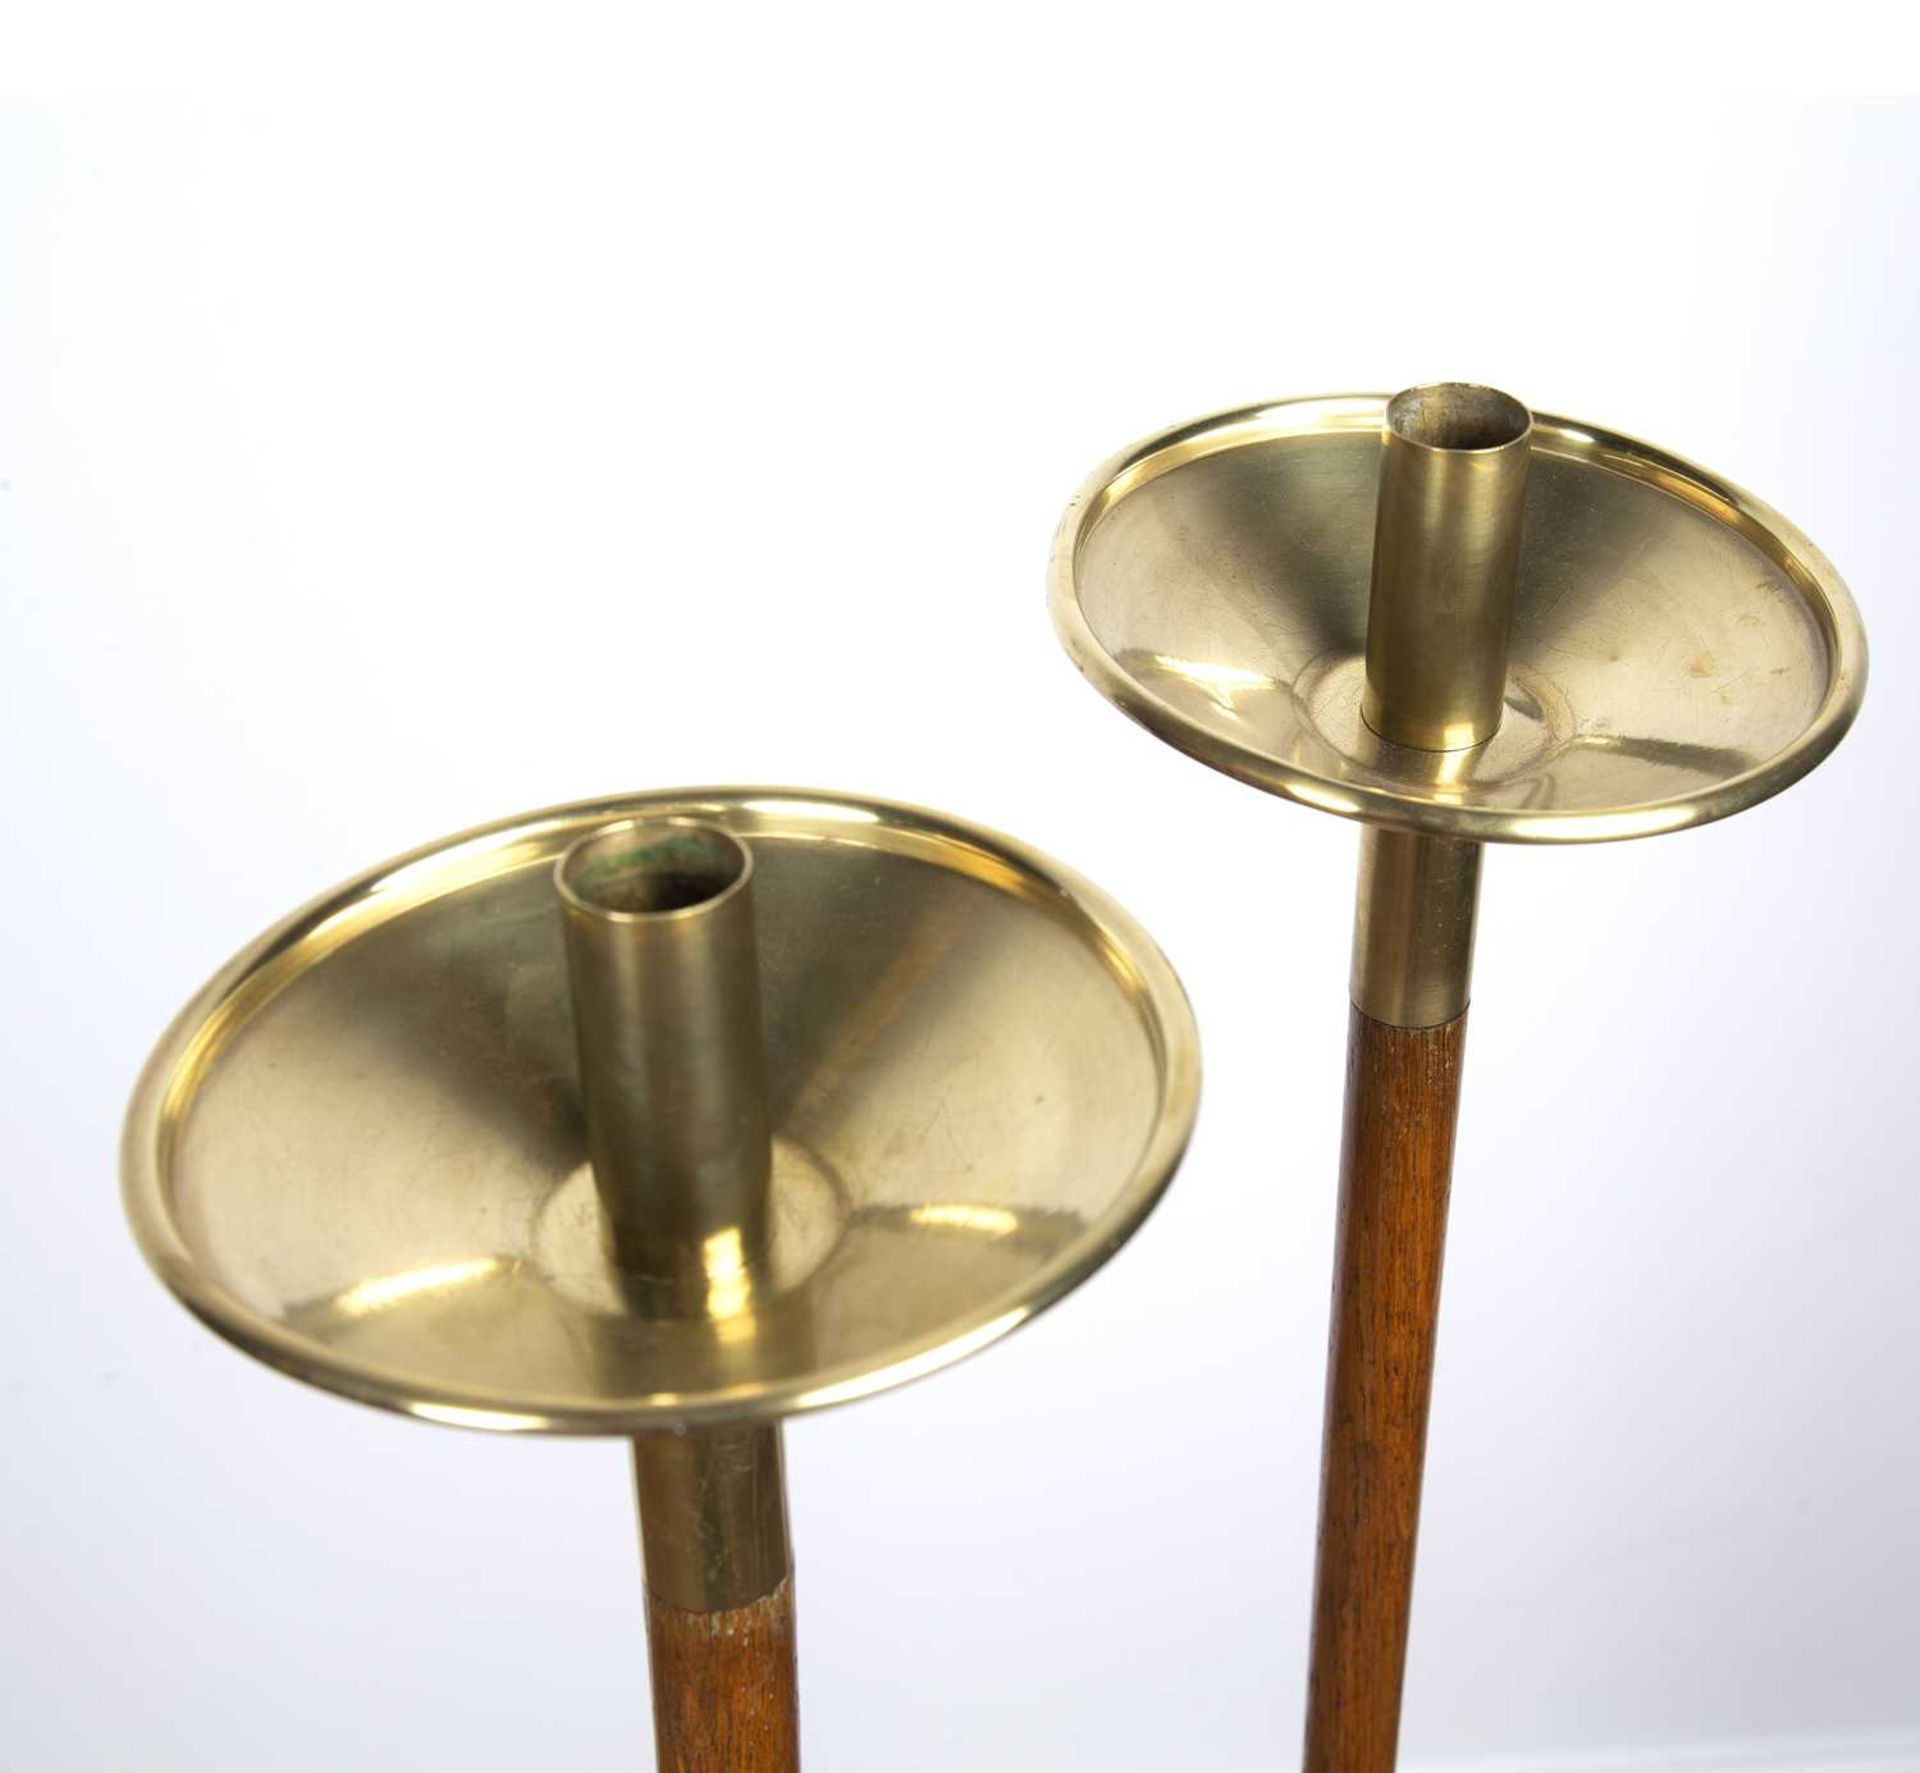 A pair of oak and brass tall floor standing candle stands in the Arts & Crafts style, 118cm high - Image 2 of 2